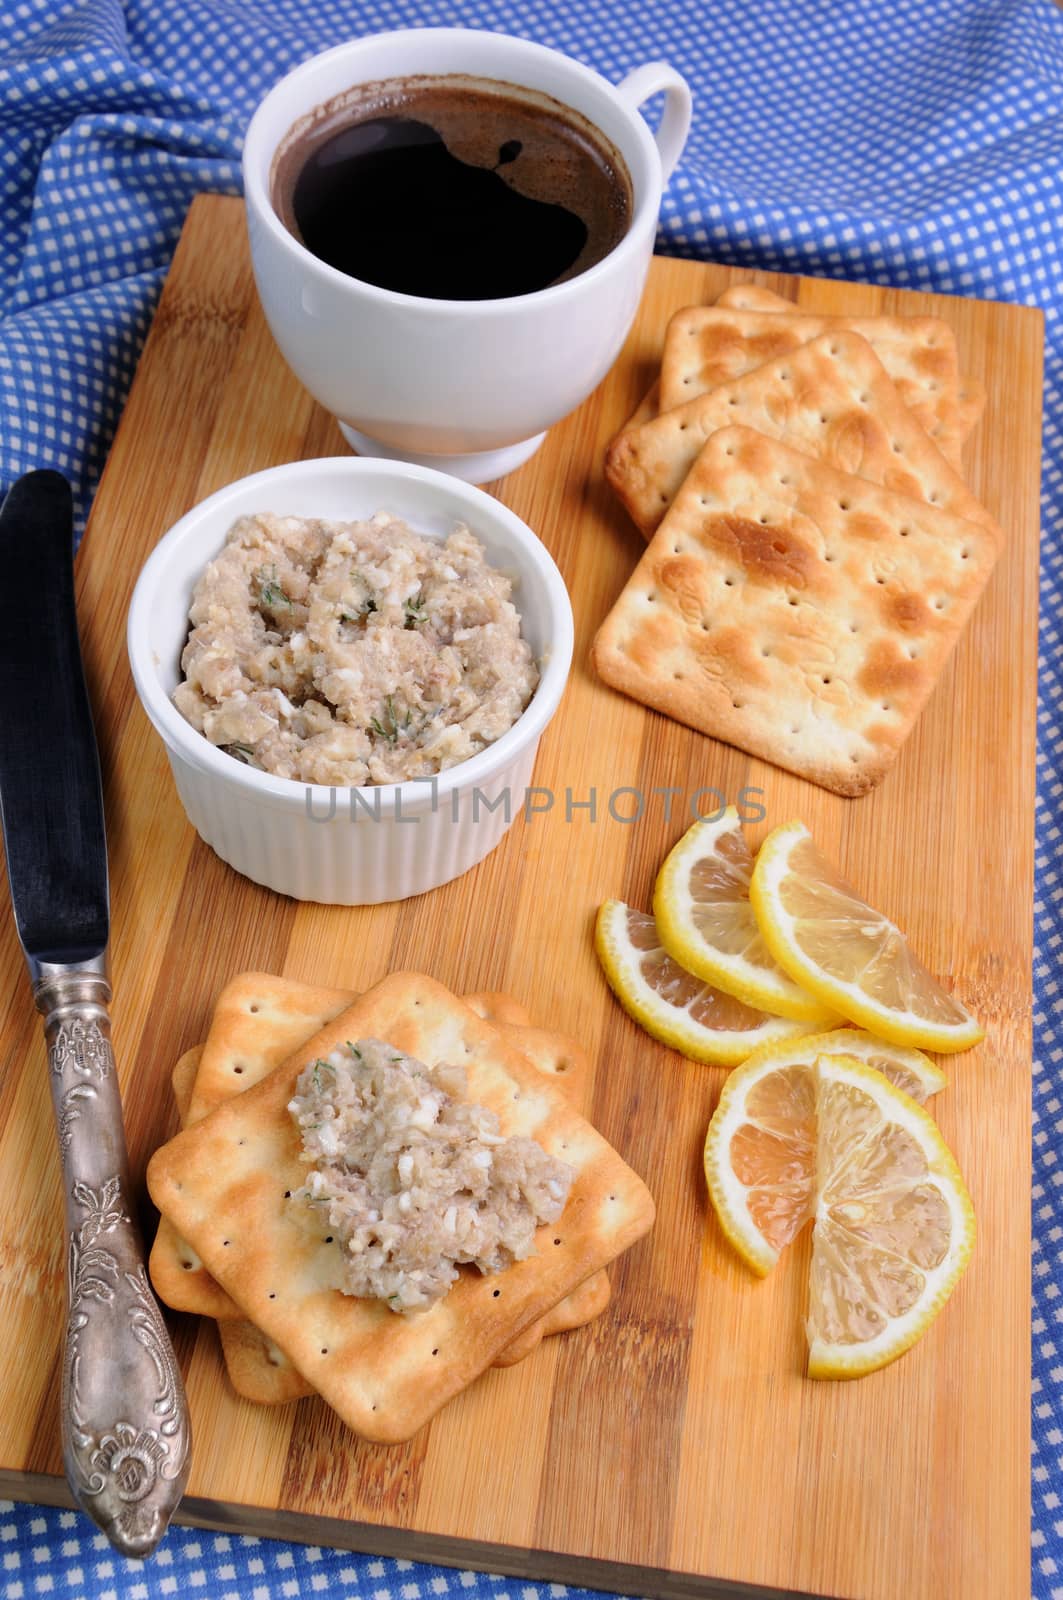 Snack  of fish paste (forshmak) on a cracker with a cup of coffee